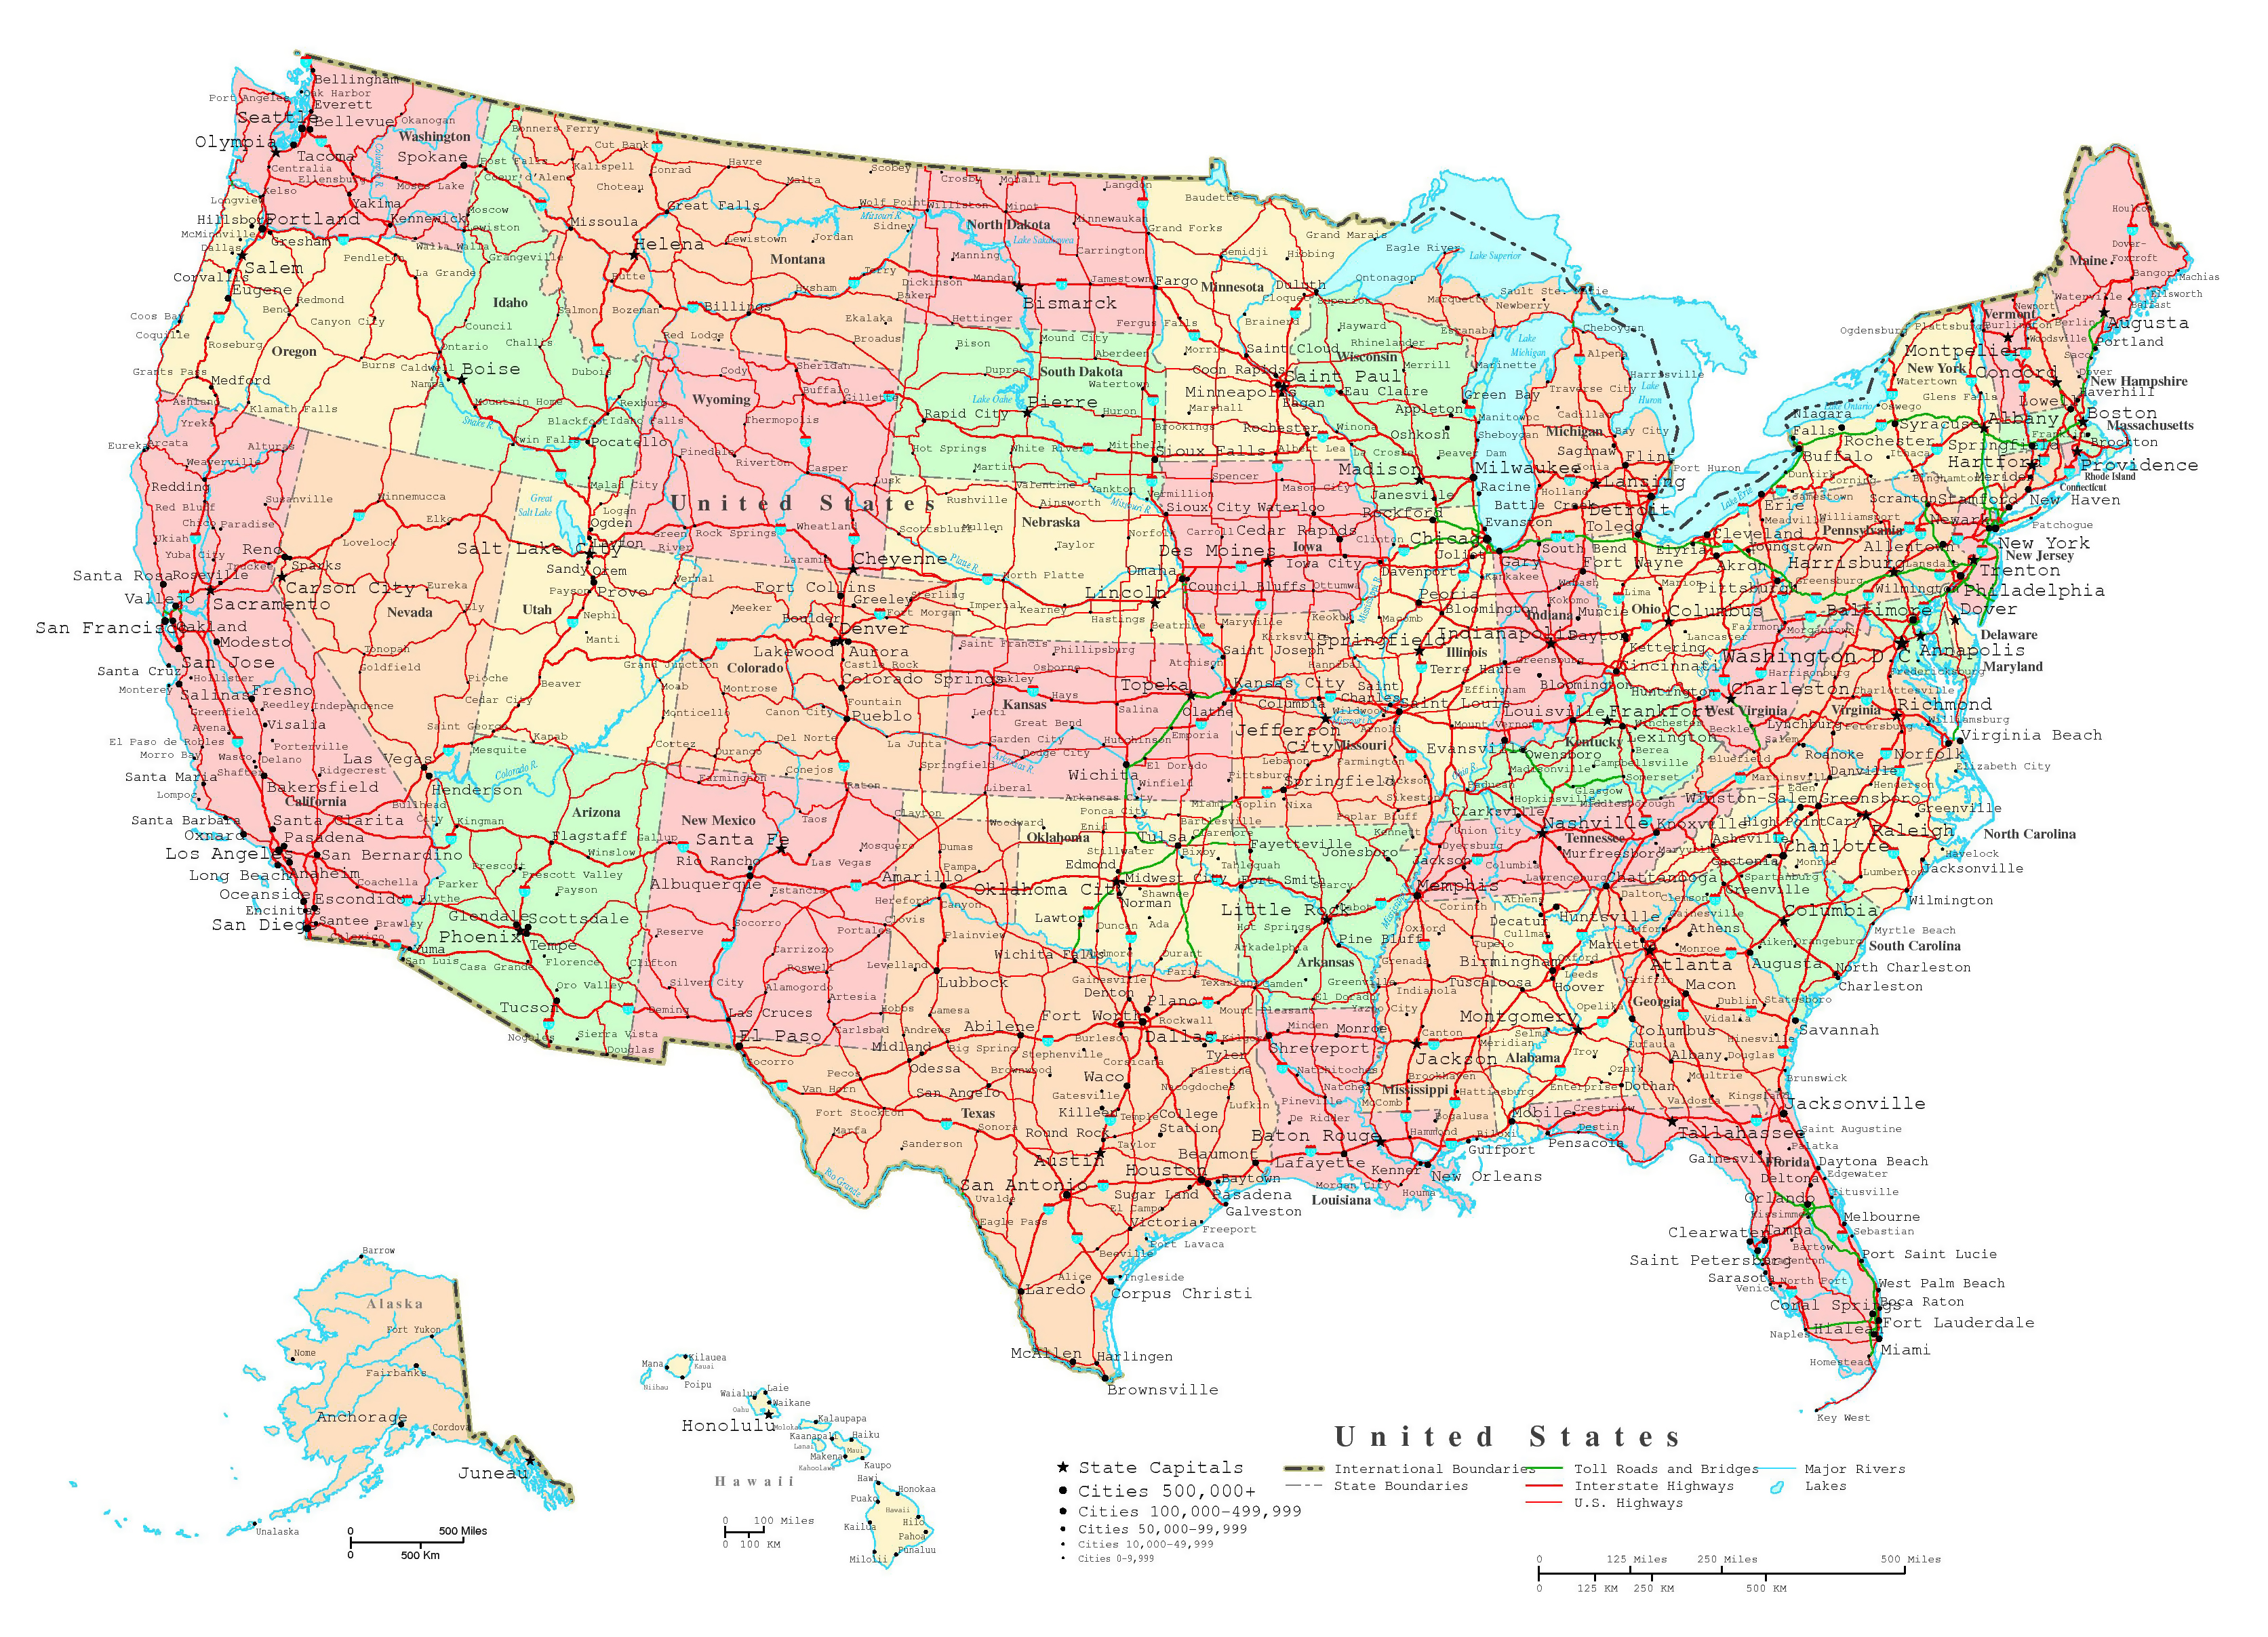 penting 13 us maps with states and cities and highways